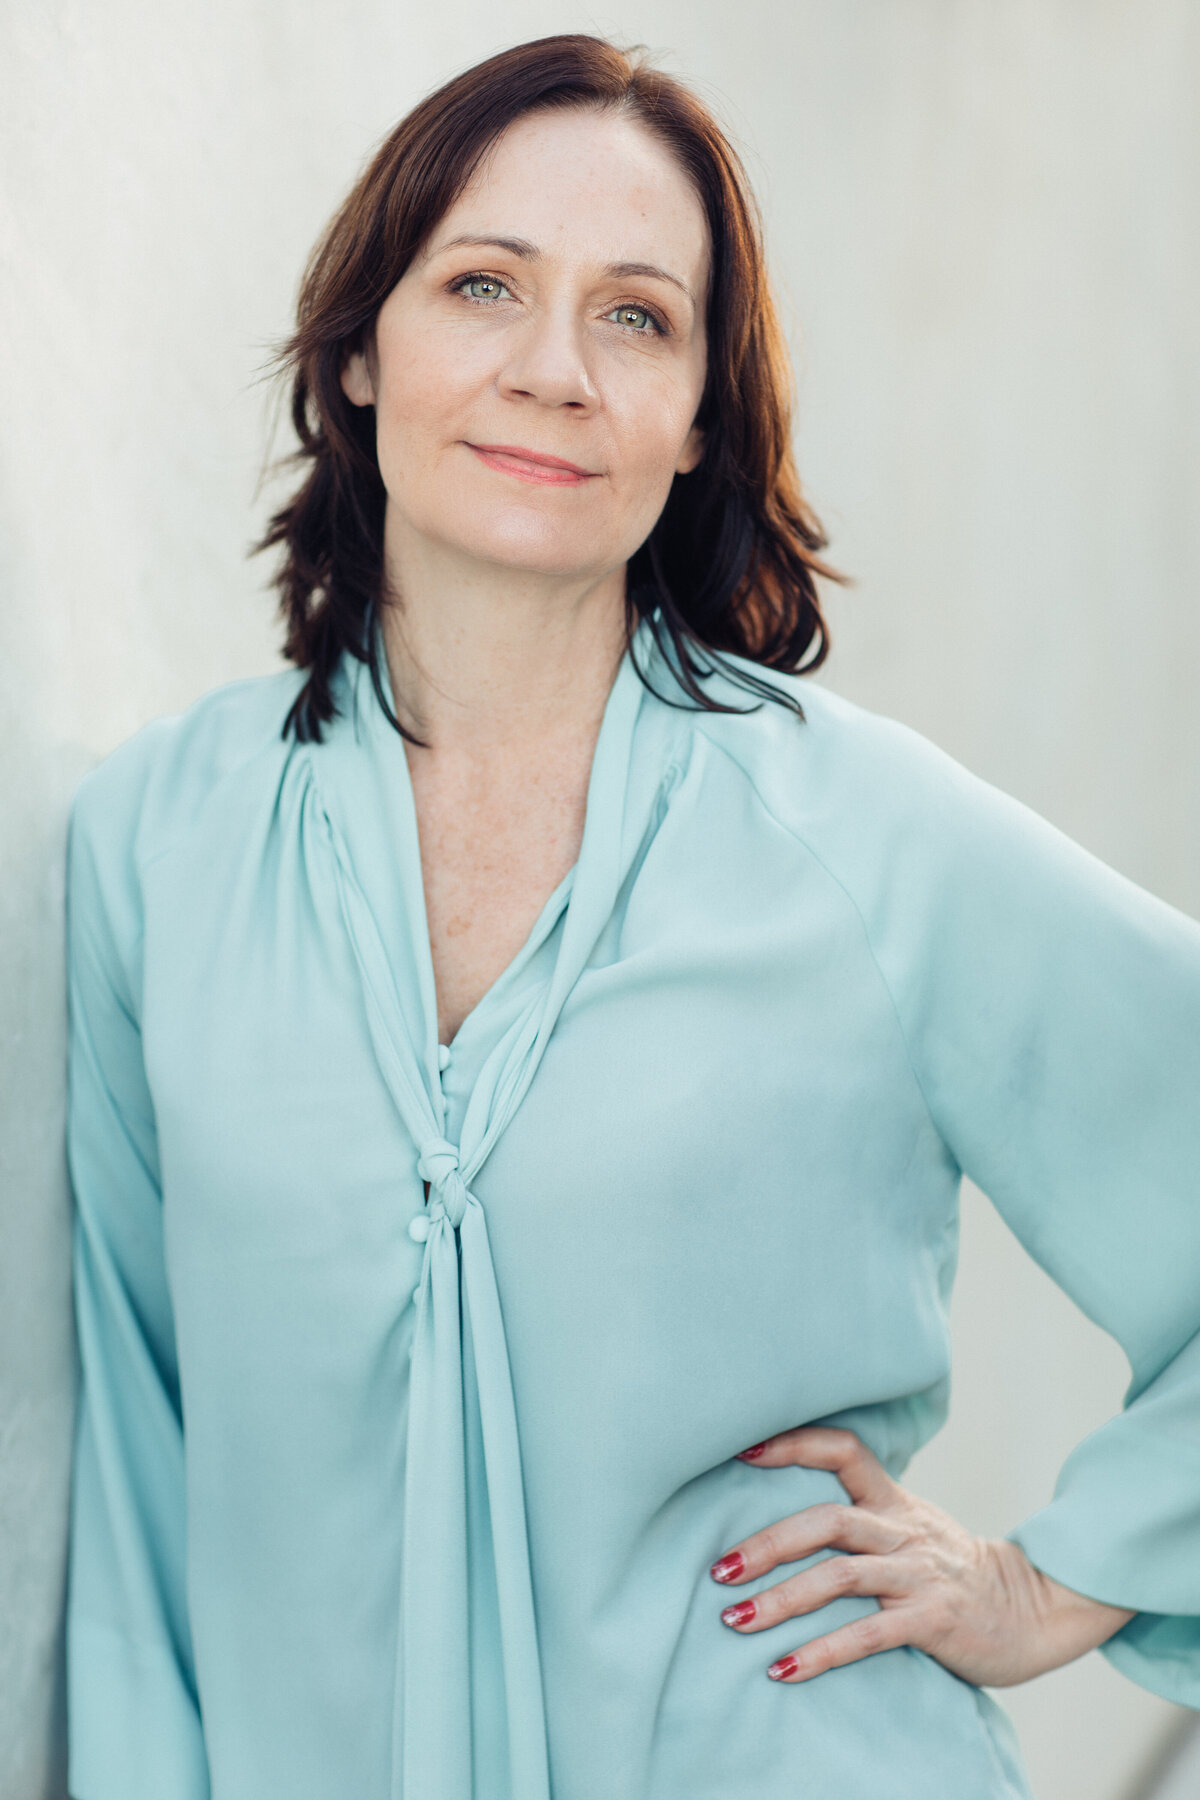 Headshot Photograph Of Woman In Light Blue Blouse Los Angeles